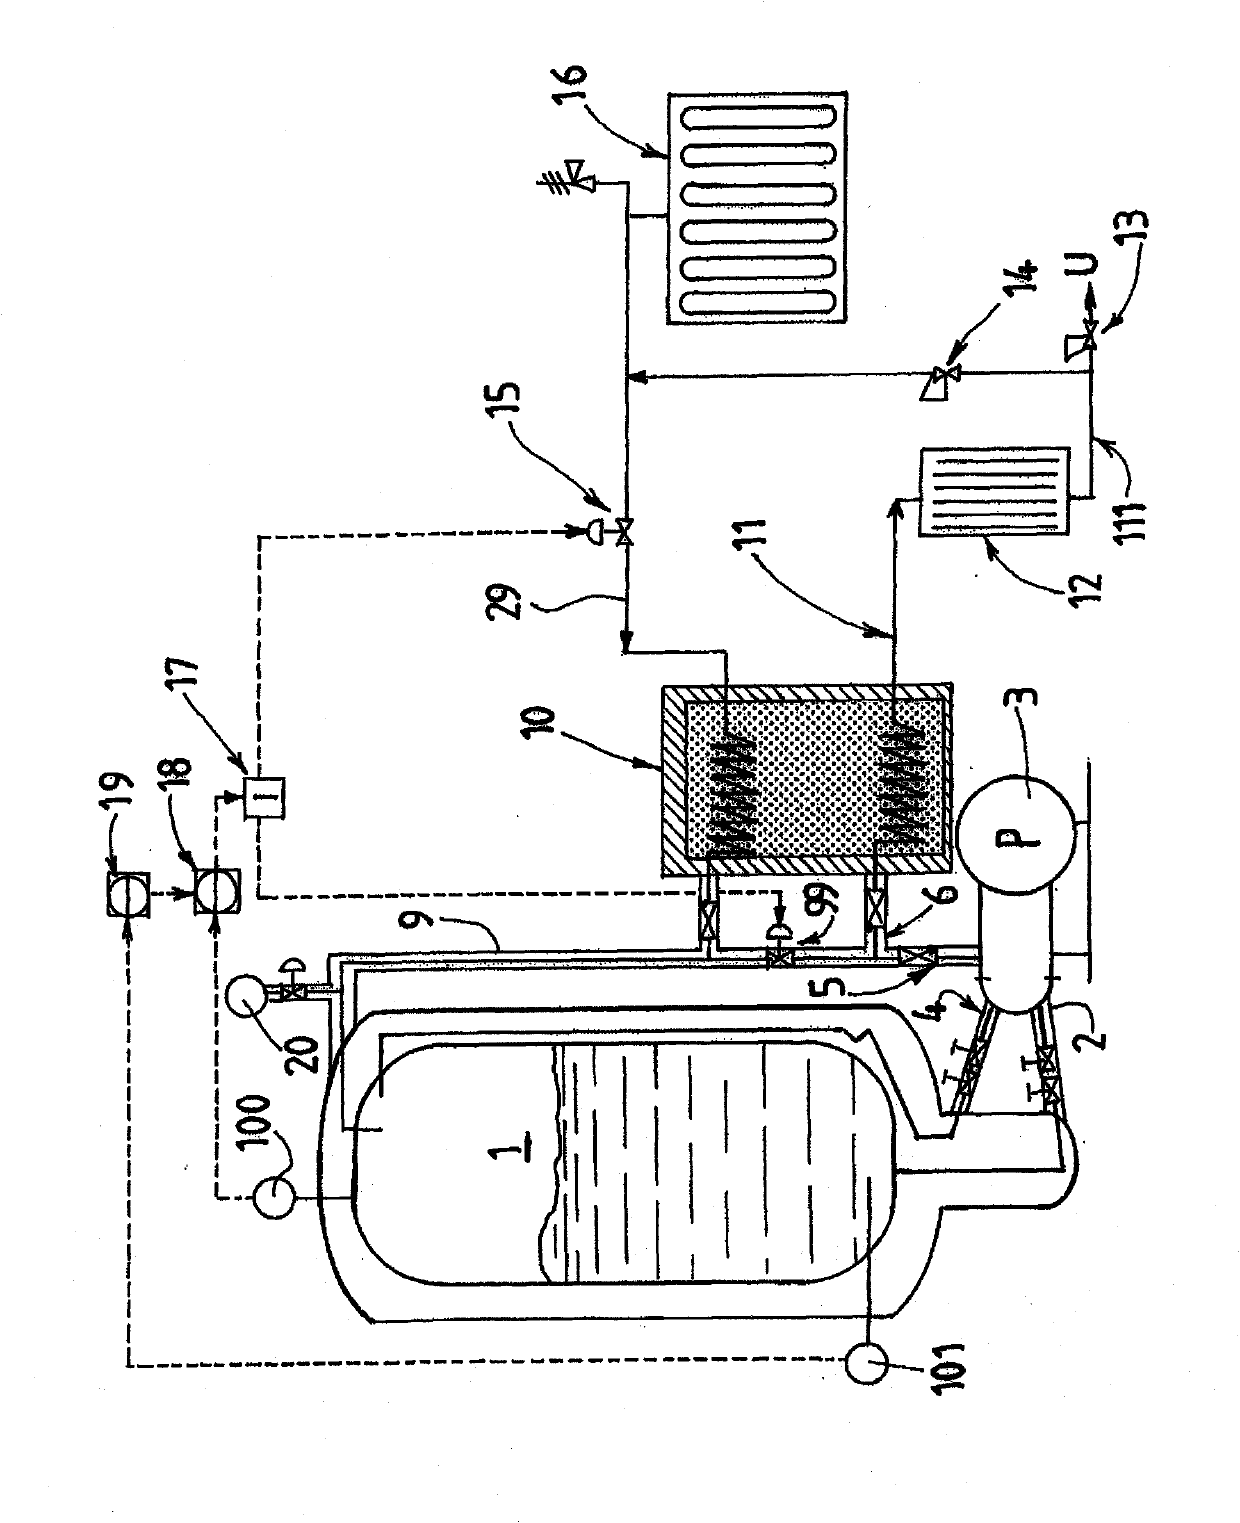 Device and method for pumping a cryogenic fluid